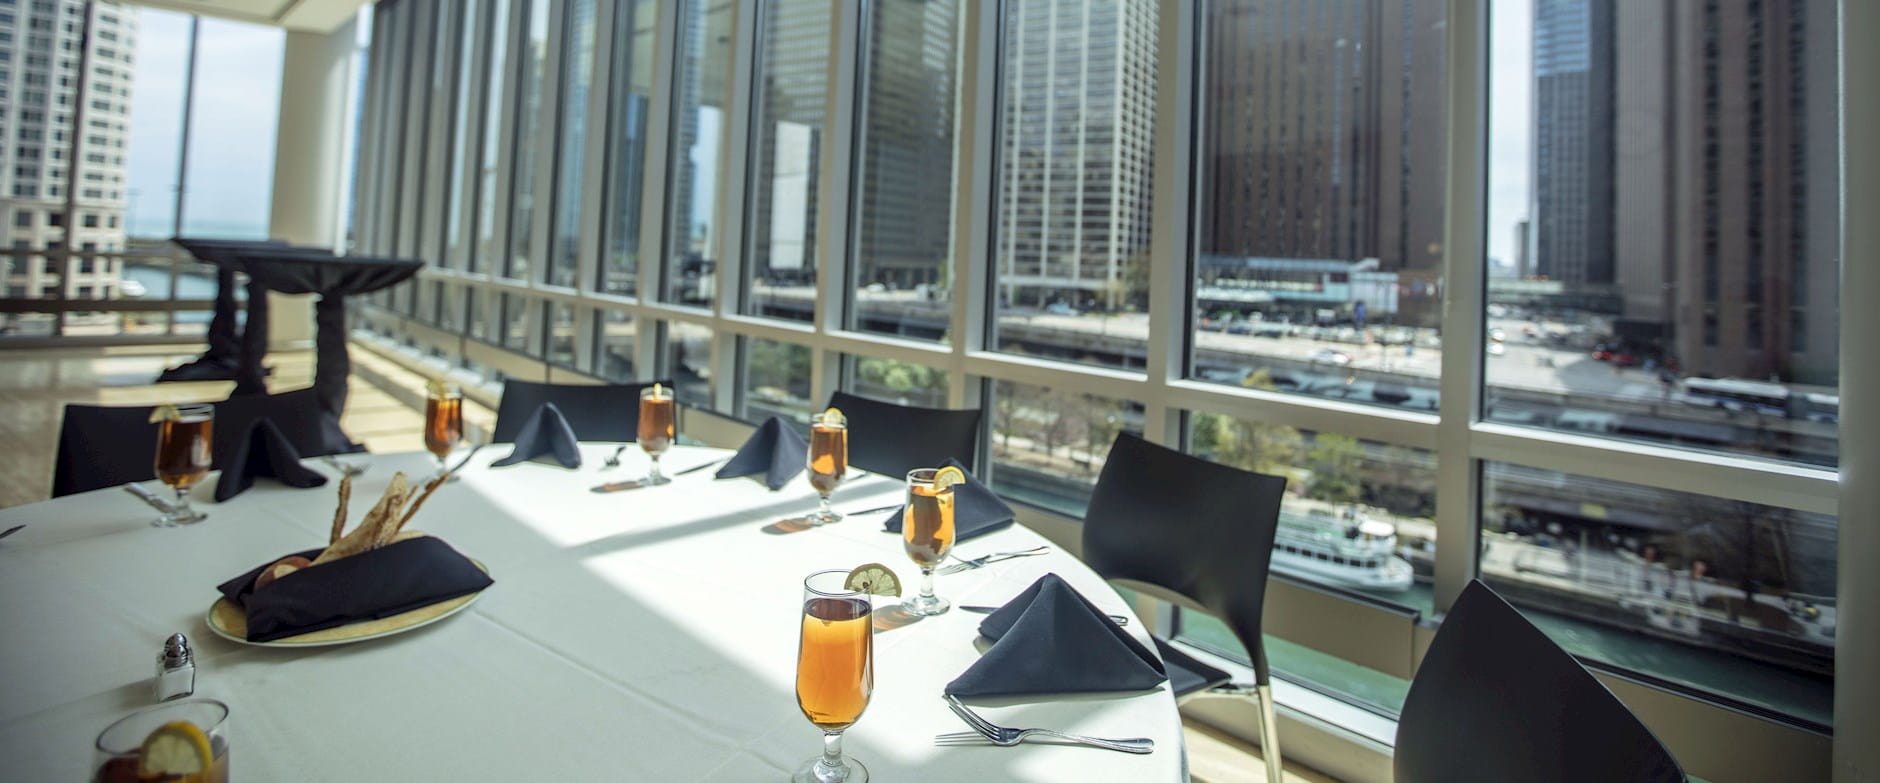 Lounge at the Gleacher Center with dining table set with glasses and napkins looking south over the Chicago River